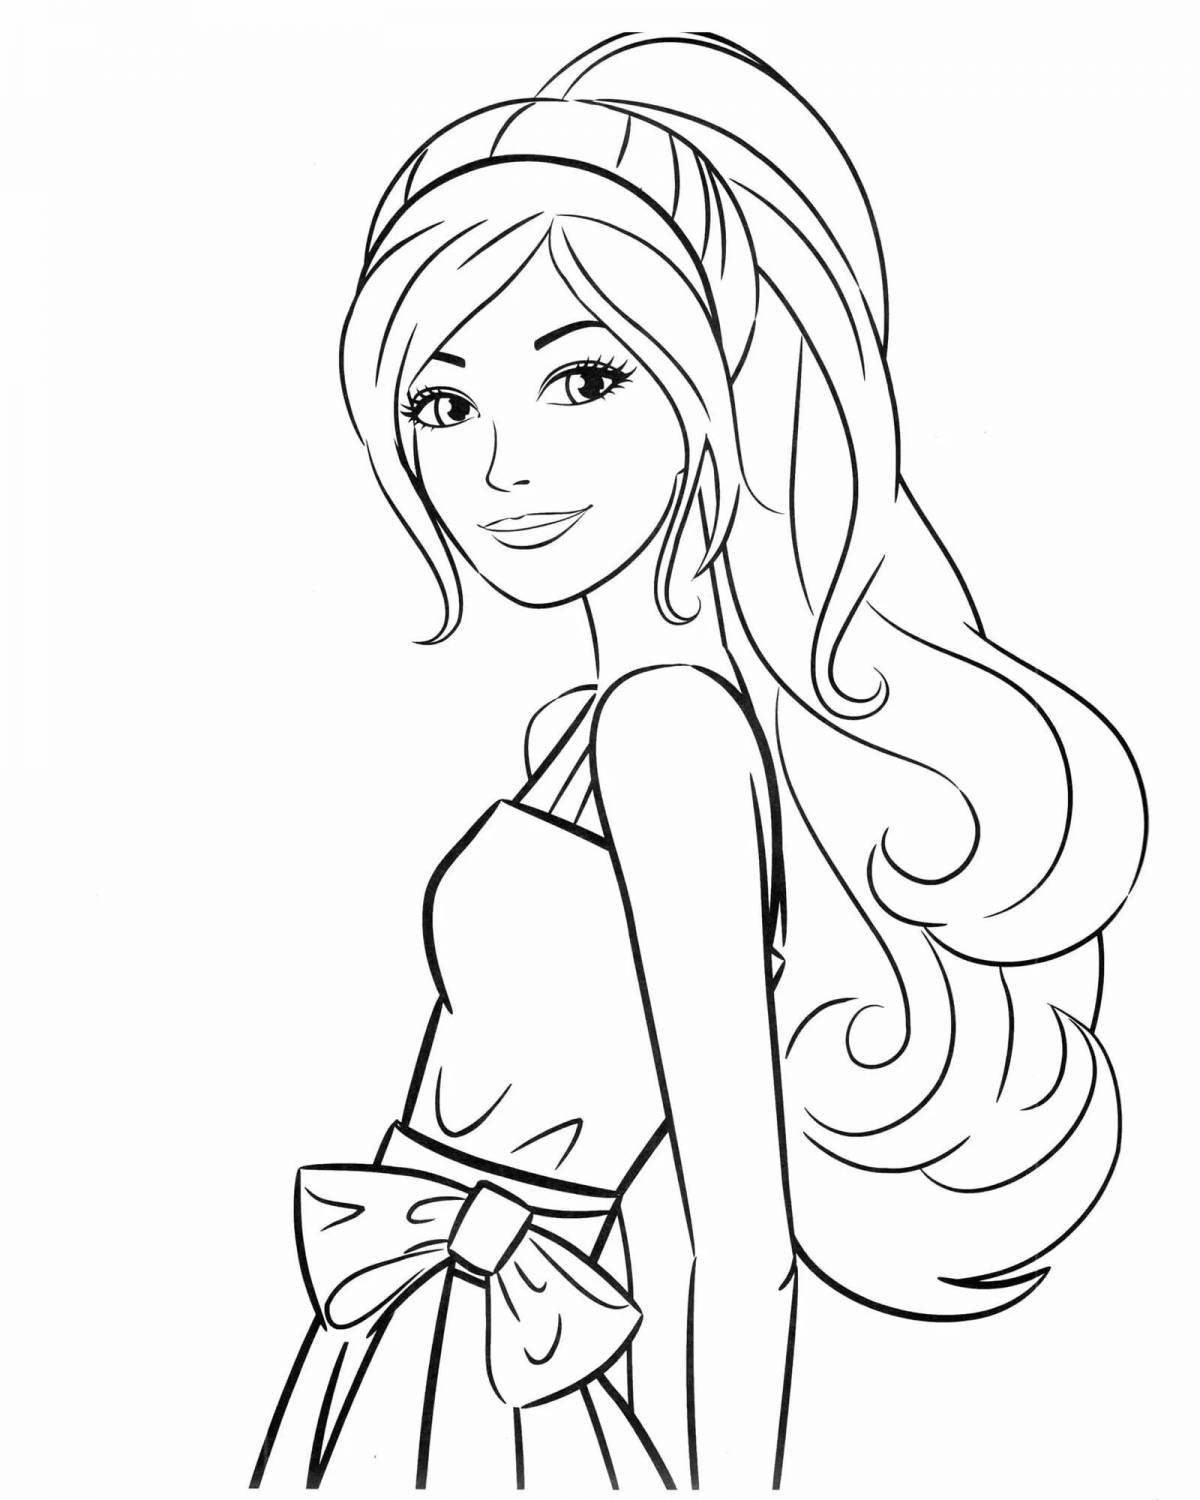 Fancy barbie doll coloring book